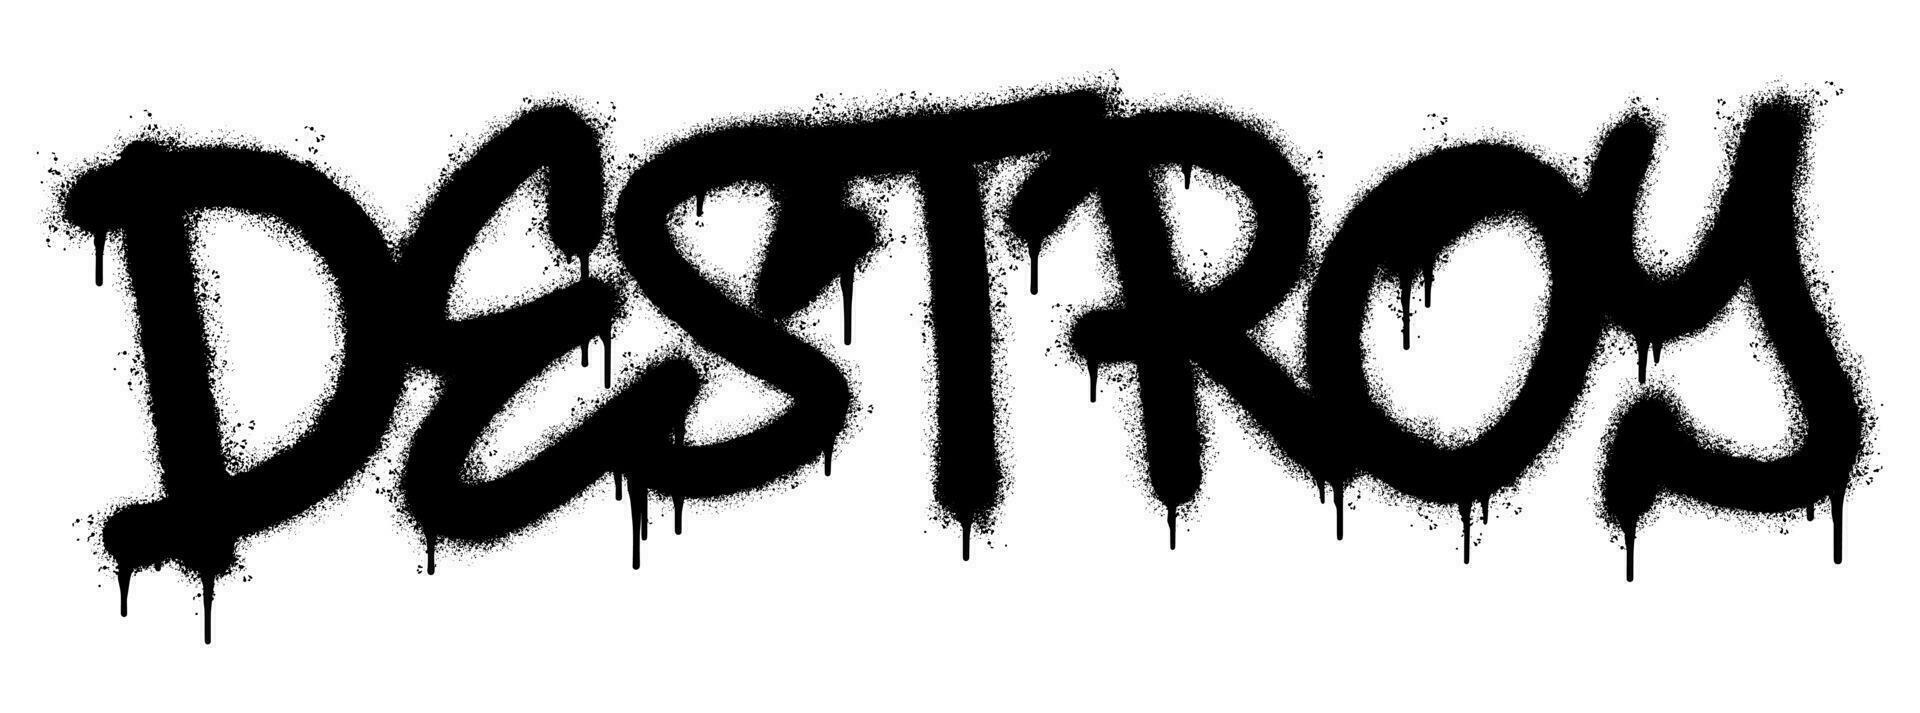 Spray Painted Graffiti Destroy Word Sprayed isolated with a white background. graffiti font Destroy with over spray in black over white. vector